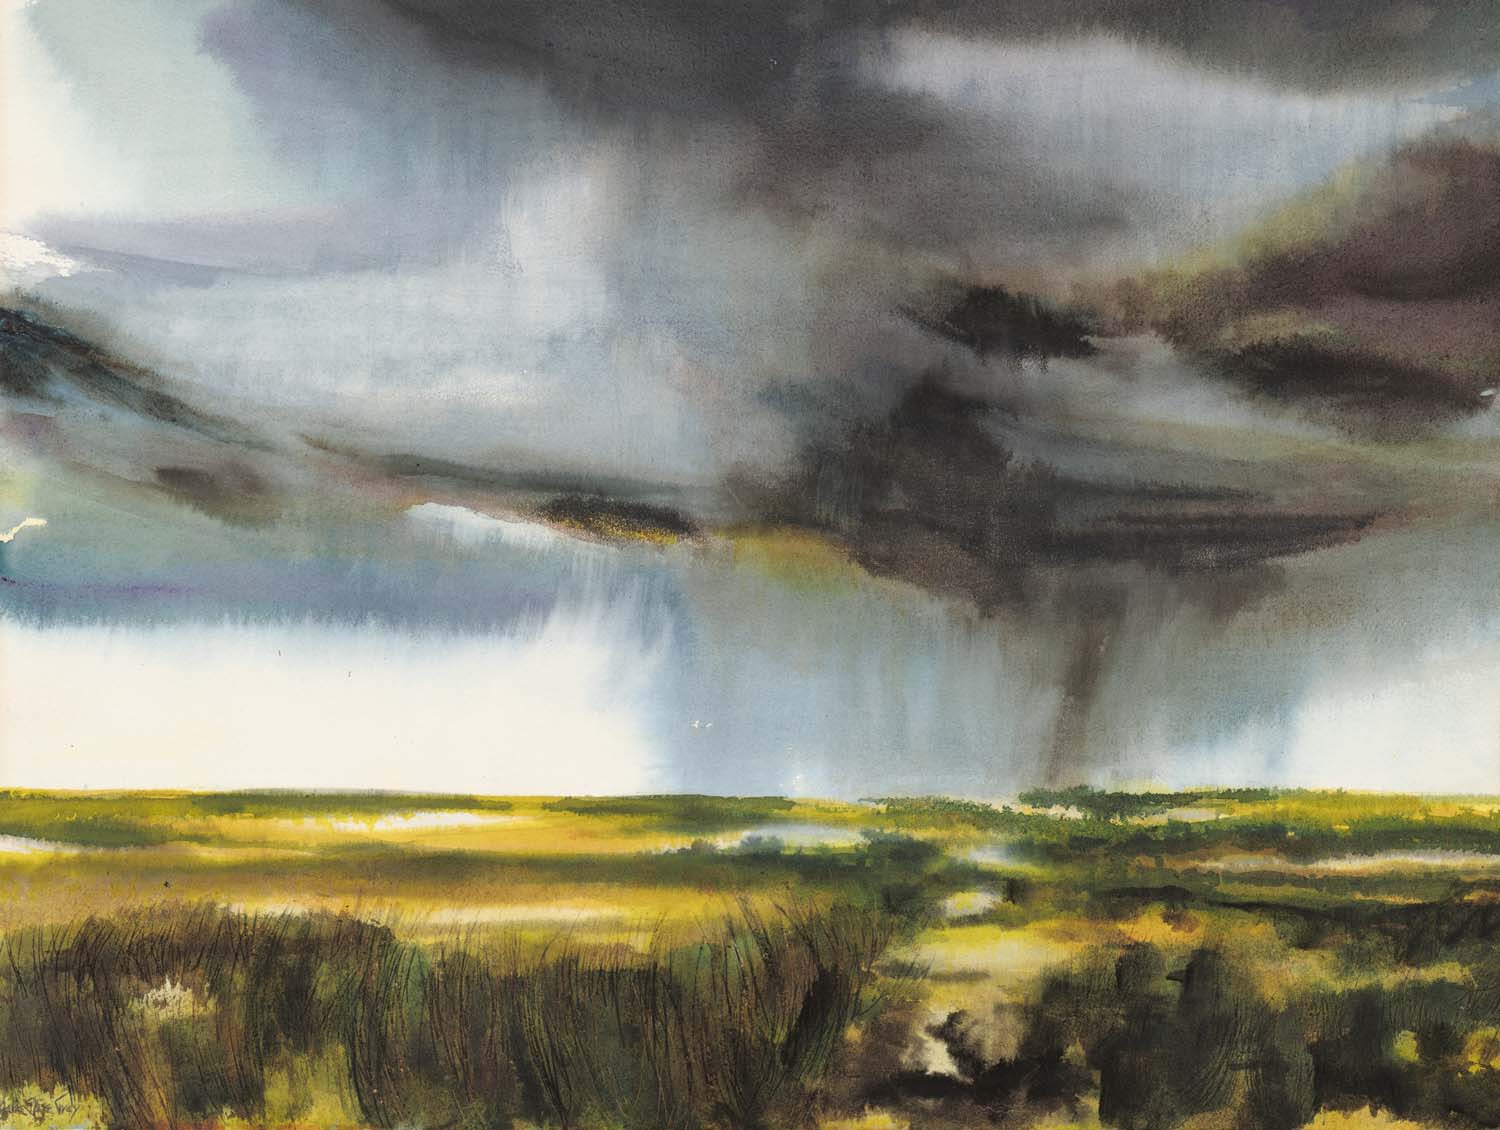 A watercolor painting of a storm in the distance